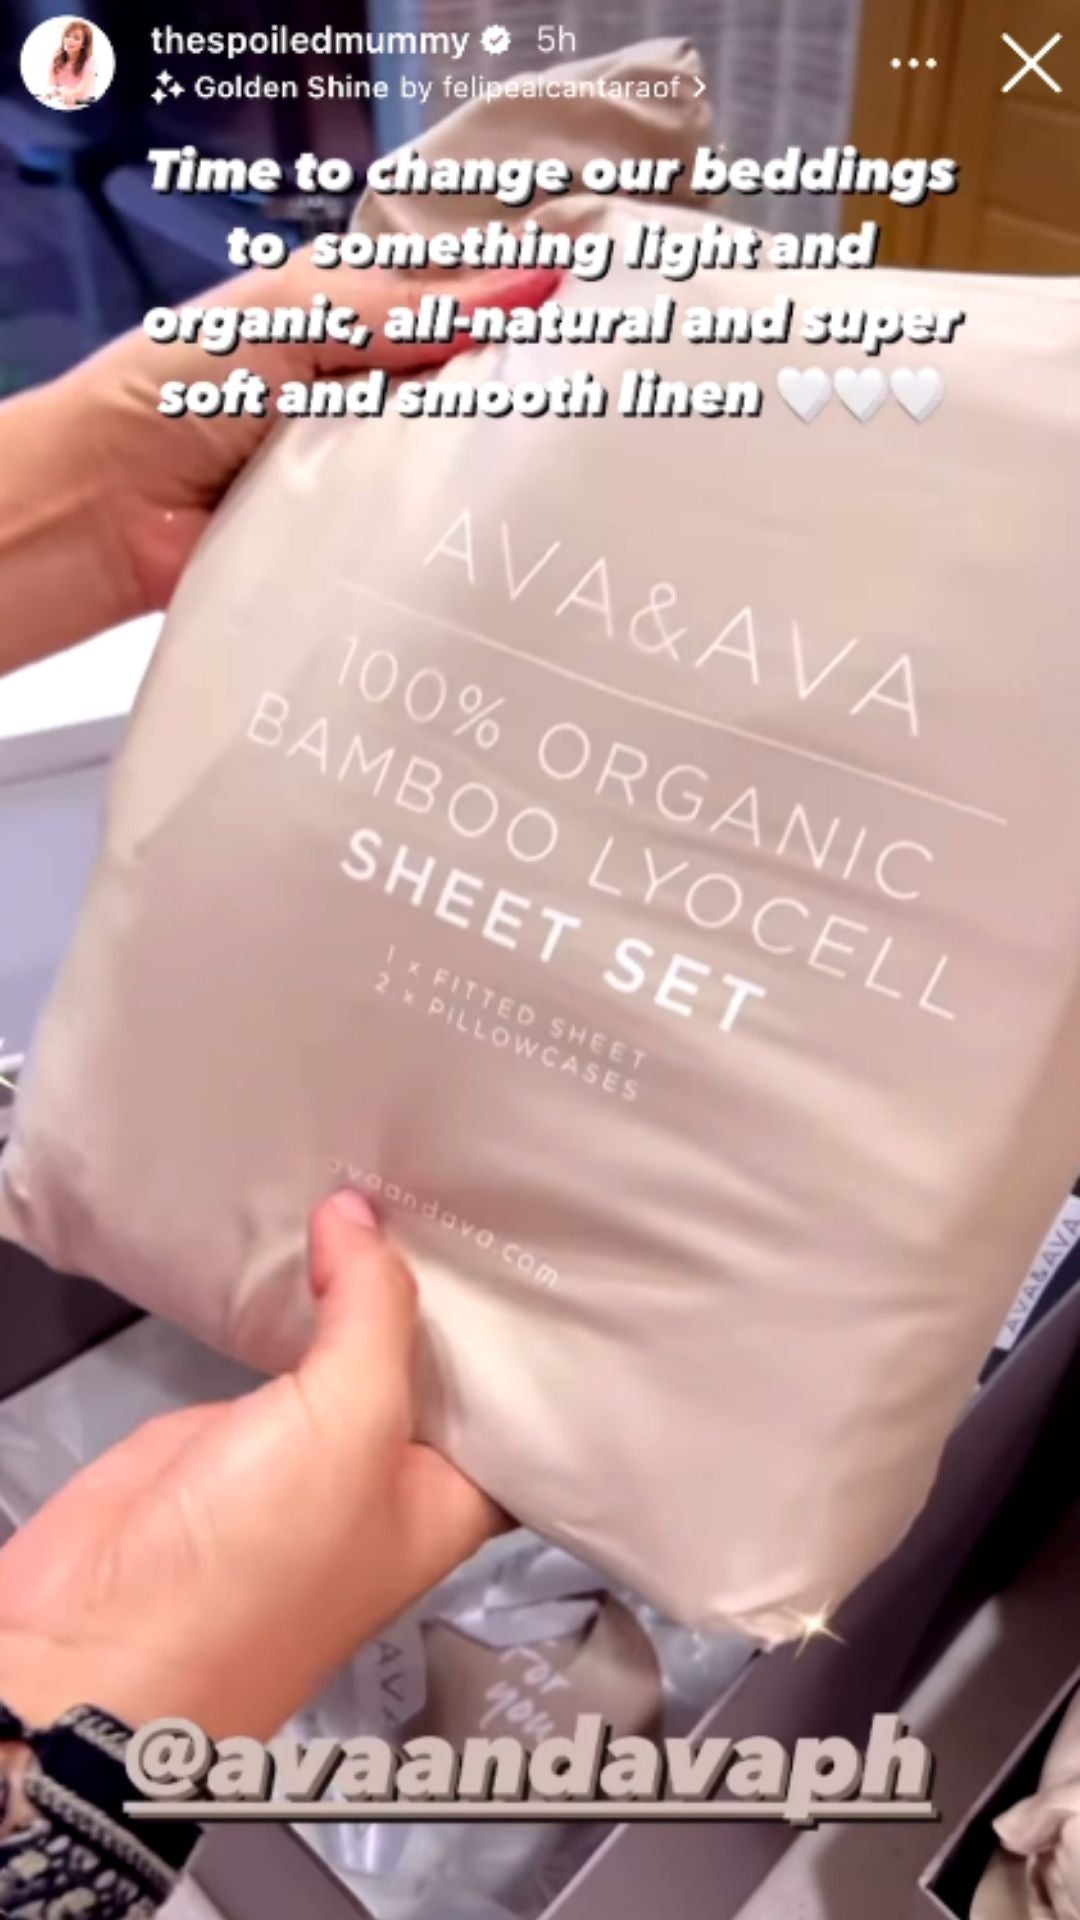 ava and ava buttery breathable organic bamboo lyocell duvet cover in sand beige in gray gift box packaging by thespoiledmummy (grace barbers baja)